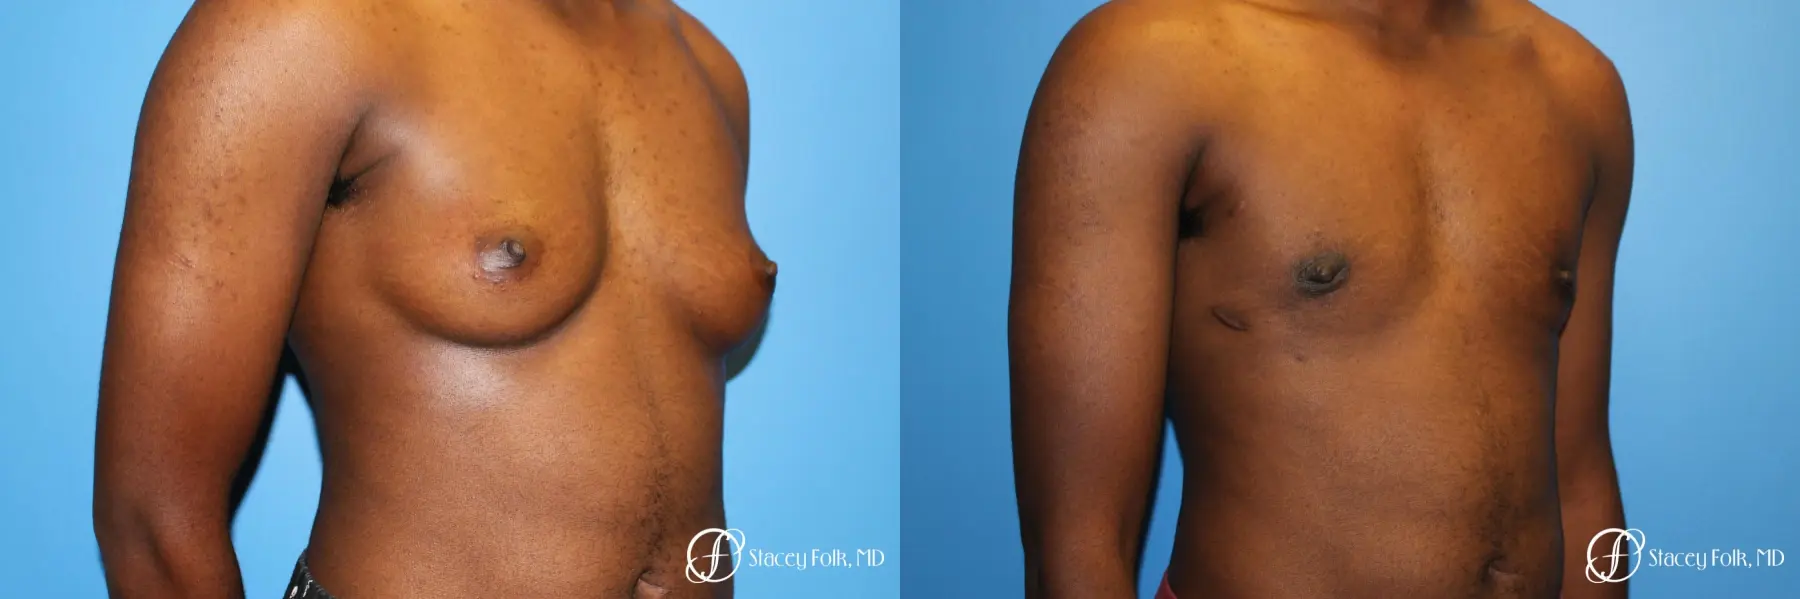 Denver FTM Female to male top surgery using gynecomastia technique 5497 - Before and After 2